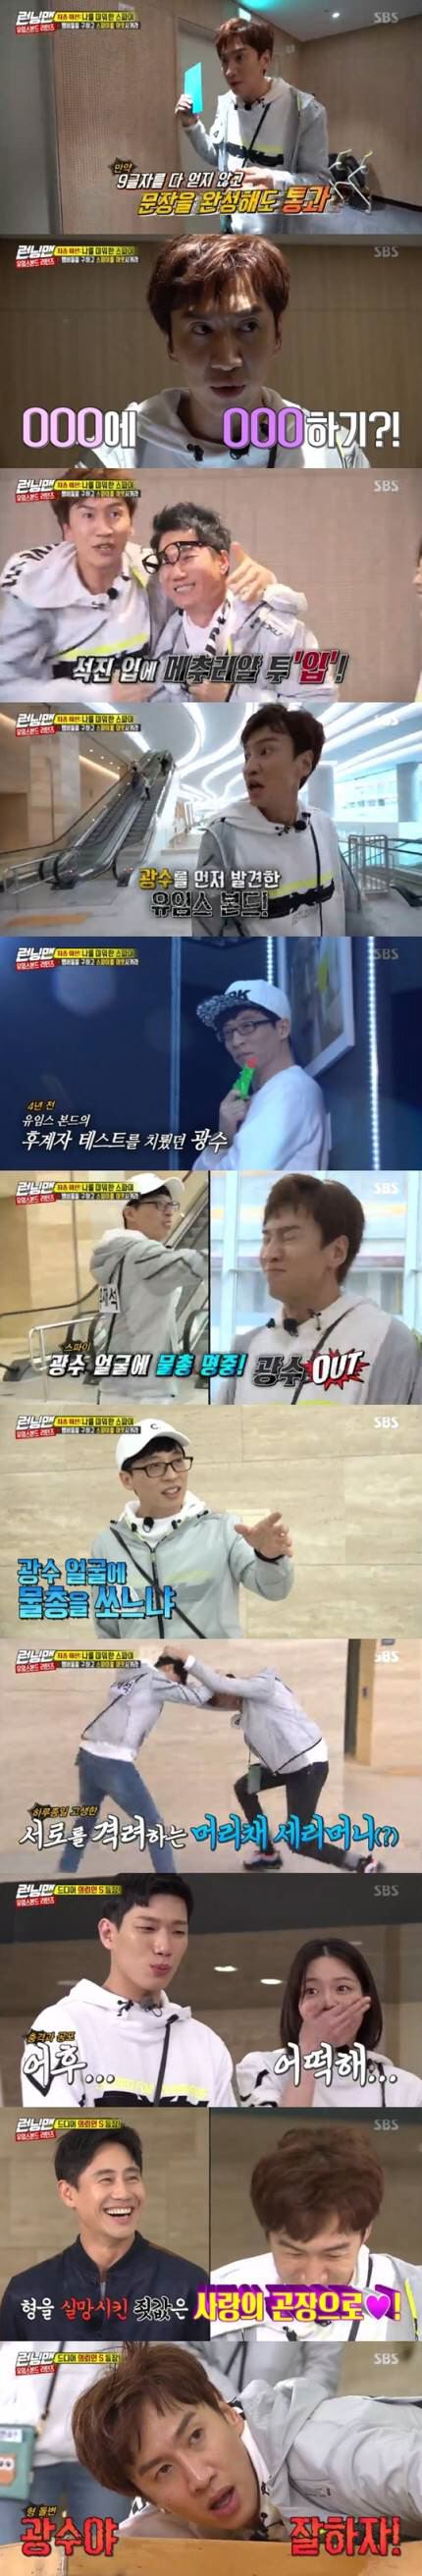 Running Man Yoo Jae-Suk announces Yumes Bonds successful returnActor Esom and Kim Kyung Nam of the movie My Special Brother appeared in SBS entertainment program Running Man broadcast on the 28th.In a special feature decorated with My Special Money Race, members had to share 100 million won in prize money for 9 hours.At first glance, taking a nth of the prize money left after nine hours, it is a simple rule, but I had to buy all the items I needed for the game, so I had to spend money.In addition, the members were in an atmosphere to save the early money at the price higher than expected, but the full-scale consumption began when Yoo Jae-Suk purchased a 4 million won lunch box.The members were more and more crowded with the reduced prize money, and the distrust was widespread by blaming each other.Among them, Esom secretly handed a note to Yoo Jae-Suk; inside the note, Youre Yumes Bond; theres Spy whos after you.We need to find and remove Spy. After four years, Yoo Jae-Suk and his members started a race that won the amount they collected when they found the safe with their name attached to the host S.Bond Yoo Jae-Suk and Bond Girl Esom were given secret orders.When the private safe is opened, the members are infected by the money reader. Within 10 minutes, Bond should shoot the water gun on the name tag to treat Infection.If only one person is infected in Dondog and out, or Spy removes the Bond, the race ends.Yoo Jae-Suk worked hard on the mission to treat members who were infected in Dondoch and to find Spy.Members who were shot with water at Yoo Jae-Suk were quarantined in the treatment room; however, Lee Kwang-soo was out again after being shot and quarantined.Esom, who found this strange, guessed Lee Kwang-soo with Spy, and informed Yoo Jae-Suk of this fact; as Esom said, Spy was Lee Kwang-soo.I want you to make a race where Lee Kwang-soo can win, said Shin Ha-gyun, who was host S. After four years ago, he was selected as a successor to Yumes Bond, and after he was eliminated, he seems to have betrayed a lot and his personality deteriorated a lot.I wonder why I did not give him another chance. I do not doubt the ability of the madman. Please make him an opportunity to revenge him. If Spy Lee Kwang-soo wins, 100 million prize money will be awarded to Lee Kwang-soo, but if he fails, he will perform a single penalty.Lee Kwang-soo had to figure out how to handle the Uims Bond, who was looking for him. Lee Kwang-soos first mission was to buy nine quail eggs.Also, this quail egg should be put into the members body one by one to get hints to deal with Yoo Jae-Suk.With Esoms help, the full-scale pursuit of Yoo Jae-Suk and Lee Kwang-soo began.Lee Kwang-soo ran away from Yoo Jae-Suk Realizing that the way to catch Yoo Jae-Suk was breaking eggs in the head, he went to Yoo Jae-Suk in earnest.After ups and downs, Yoo Jae-Suk won the race final by shooting a water gun in Lee Kwang-soos face.Spy Lee Kwang-soo, who has gritted his teeth for four years, has also graced a one-off defeat this time.